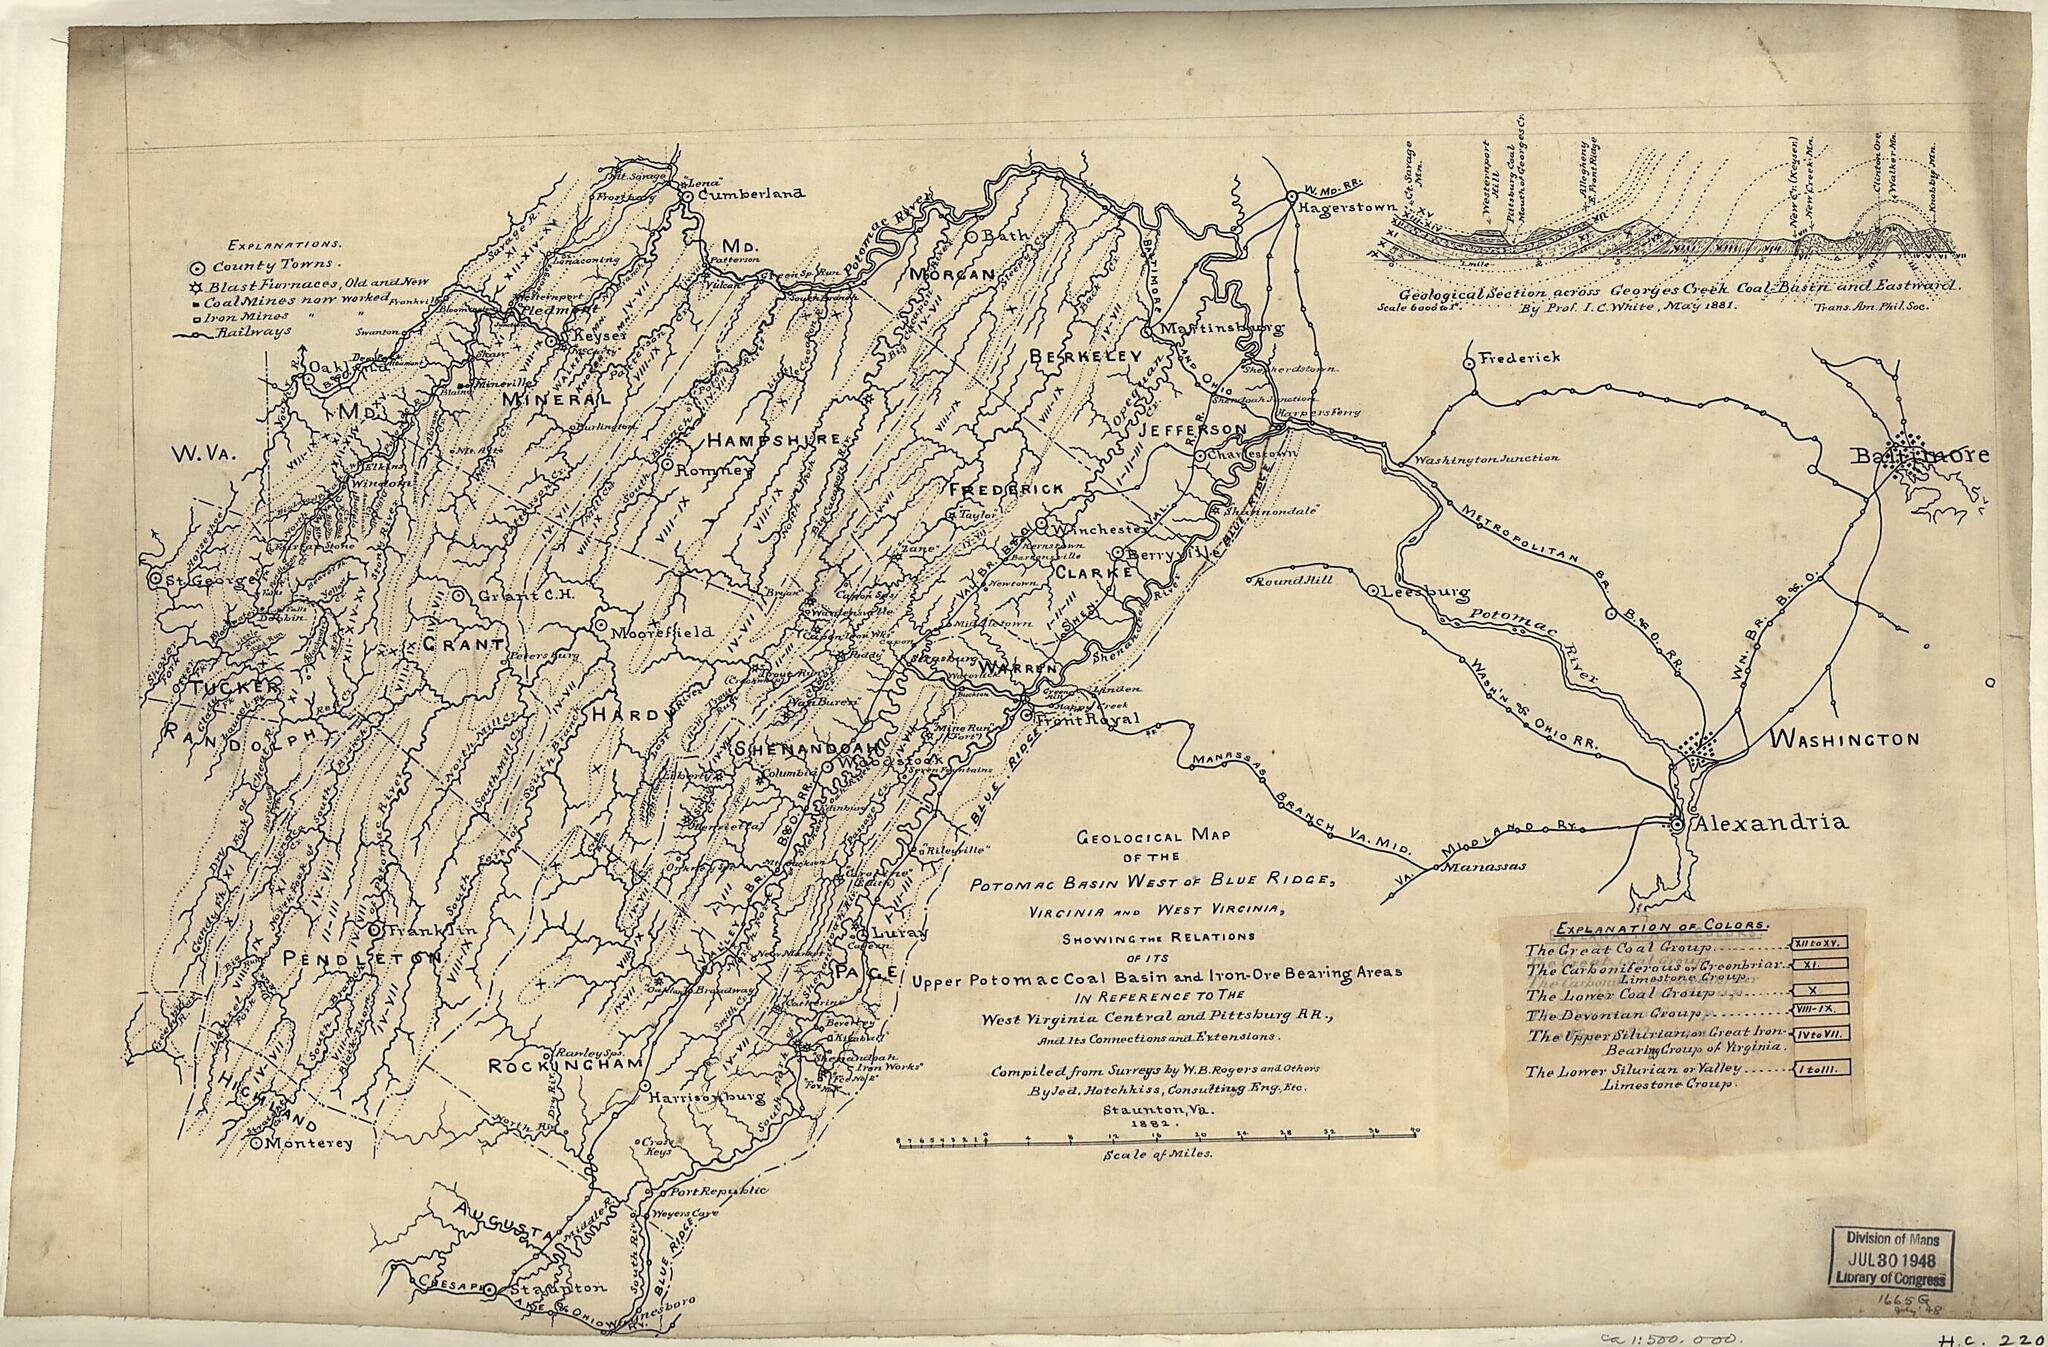 This old map of Ore Bearing Areas In Reference to the West Virginia Central and Pittsburg sic Railroad, and Its Connections and Extensions from 1882 was created by Jedediah Hotchkiss, W. B. Rogers in 1882